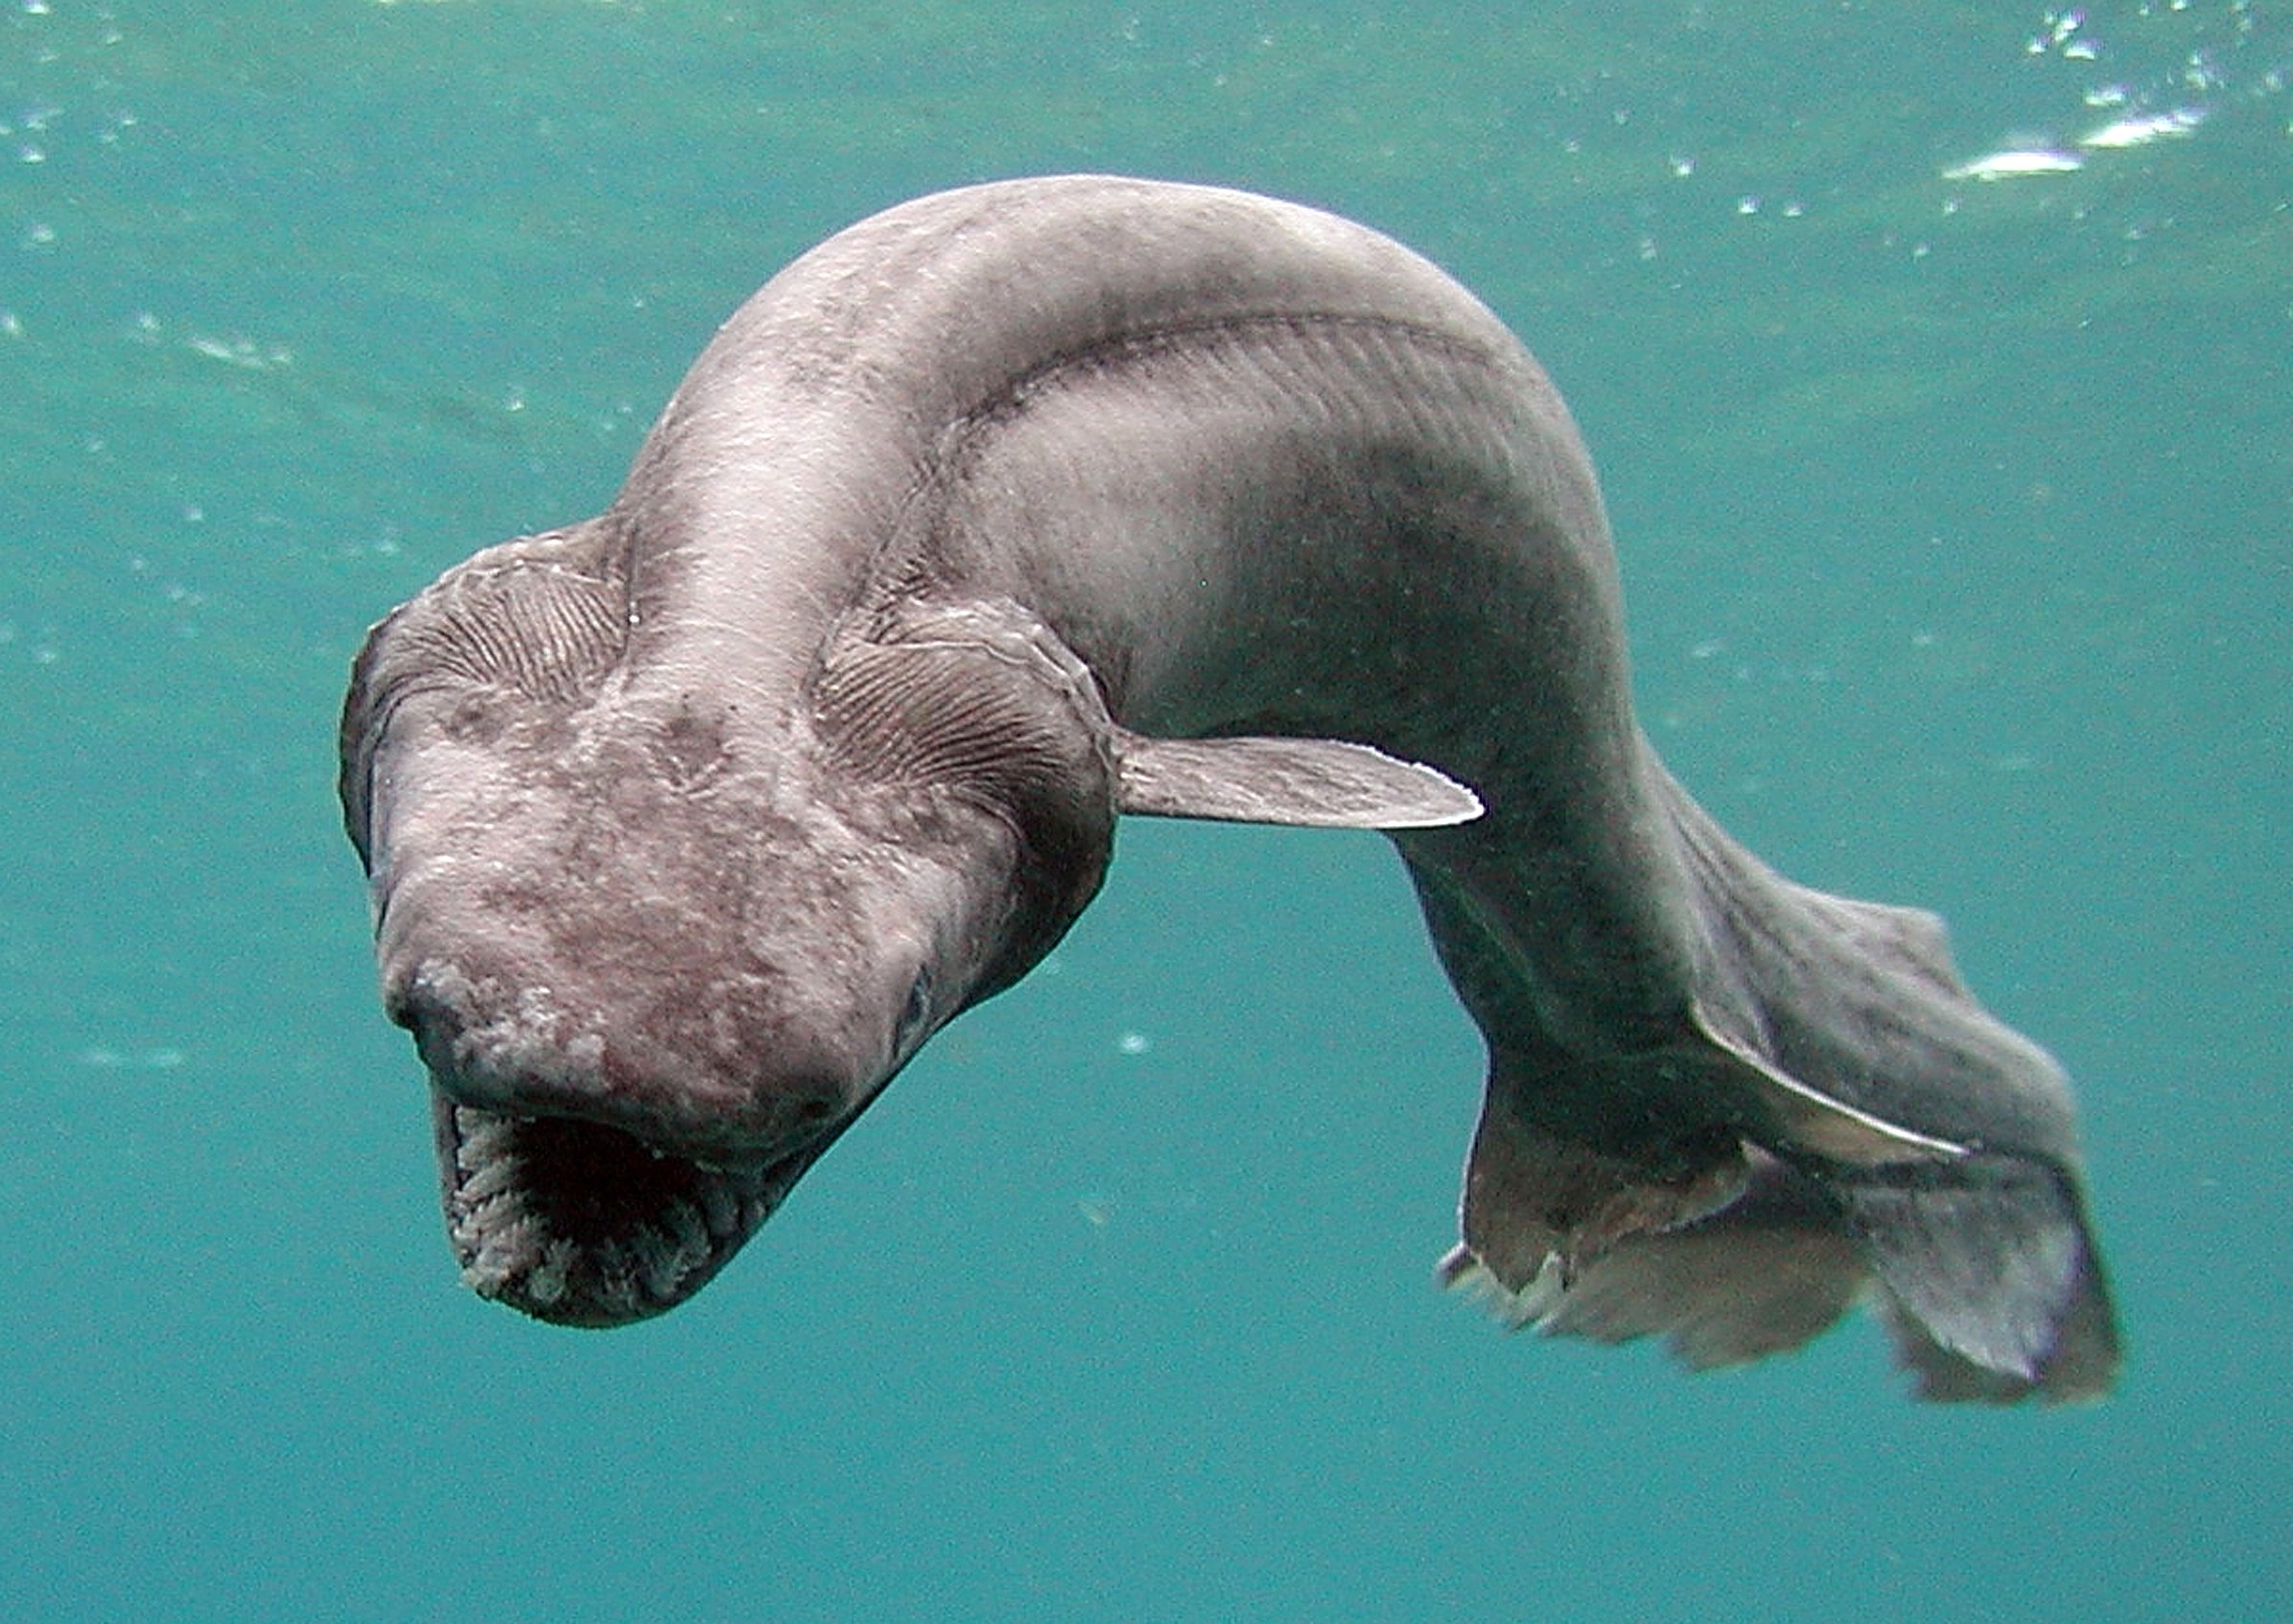 Photo of a frilled shark